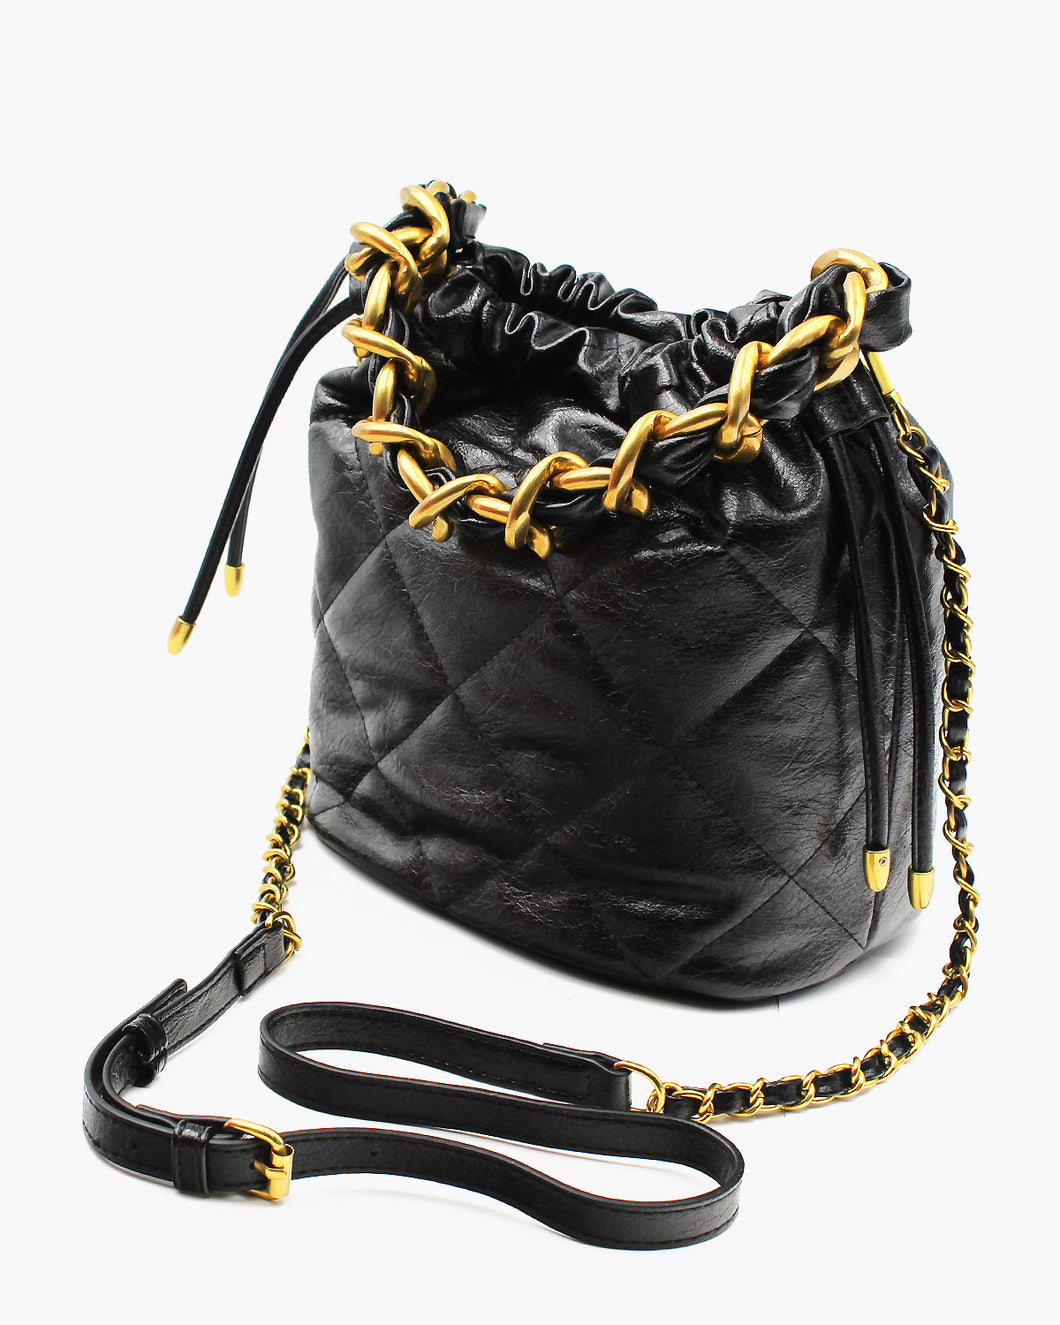 Glossy Rich Textured Leather Bag with Gold Chain